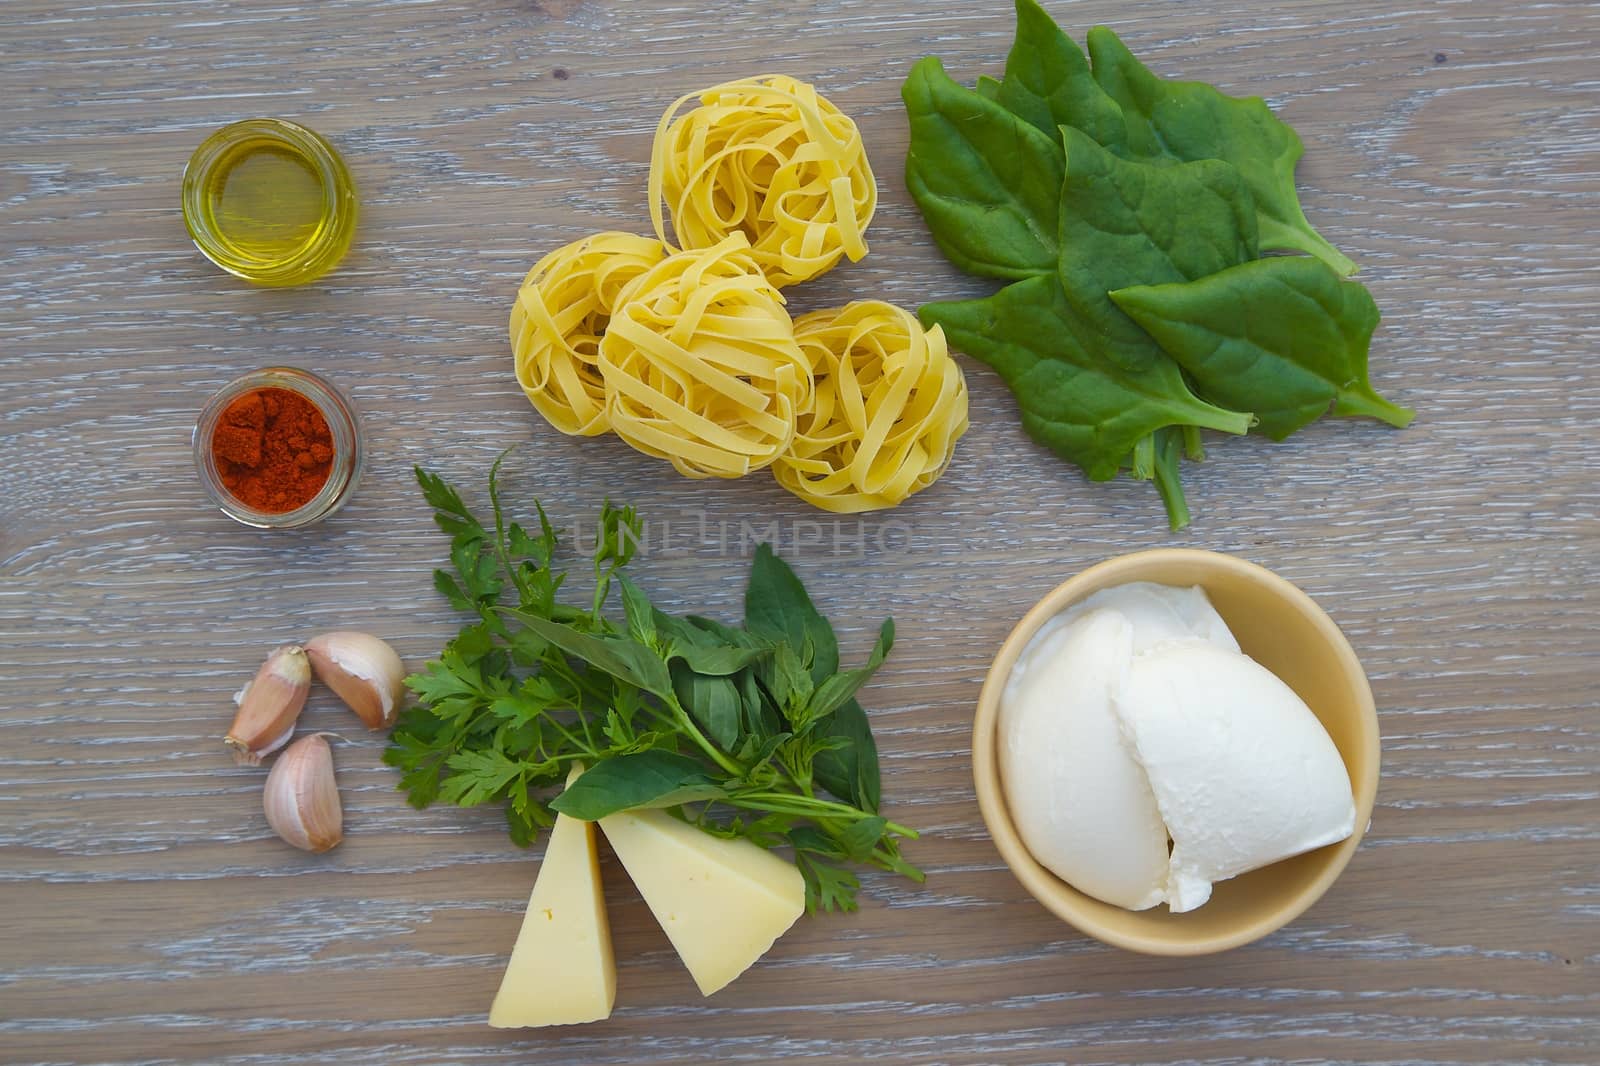 Ingredients for preparing pasta with ricotta and spinach leaves by tolikoff_photography